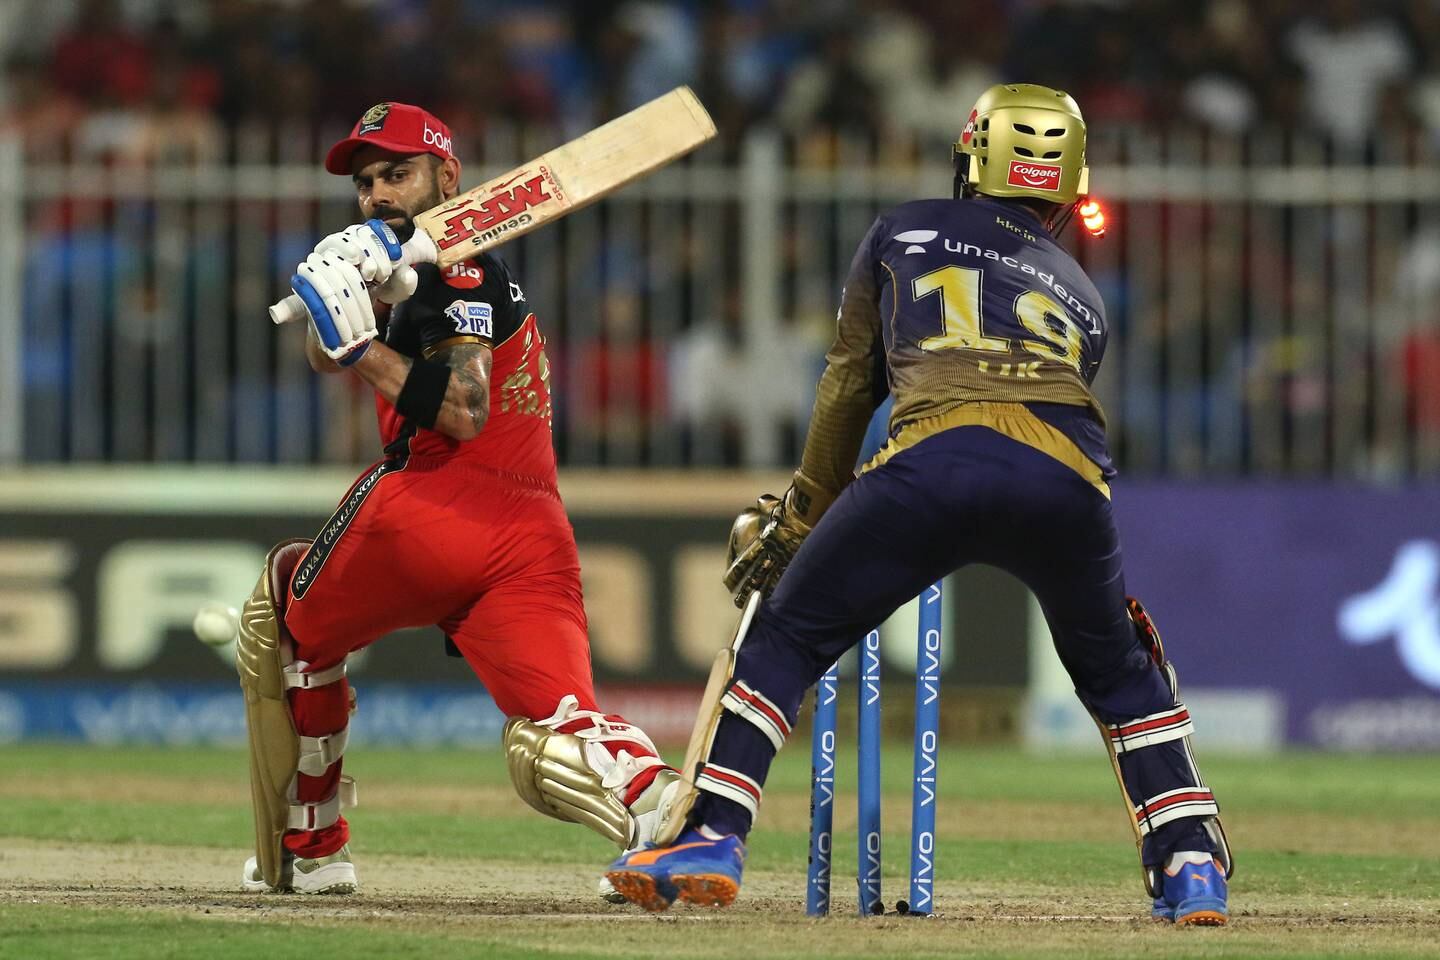 Virat Kohli will feature as just a player for Royal Challengers Bangalore. Sportzpics for IPL